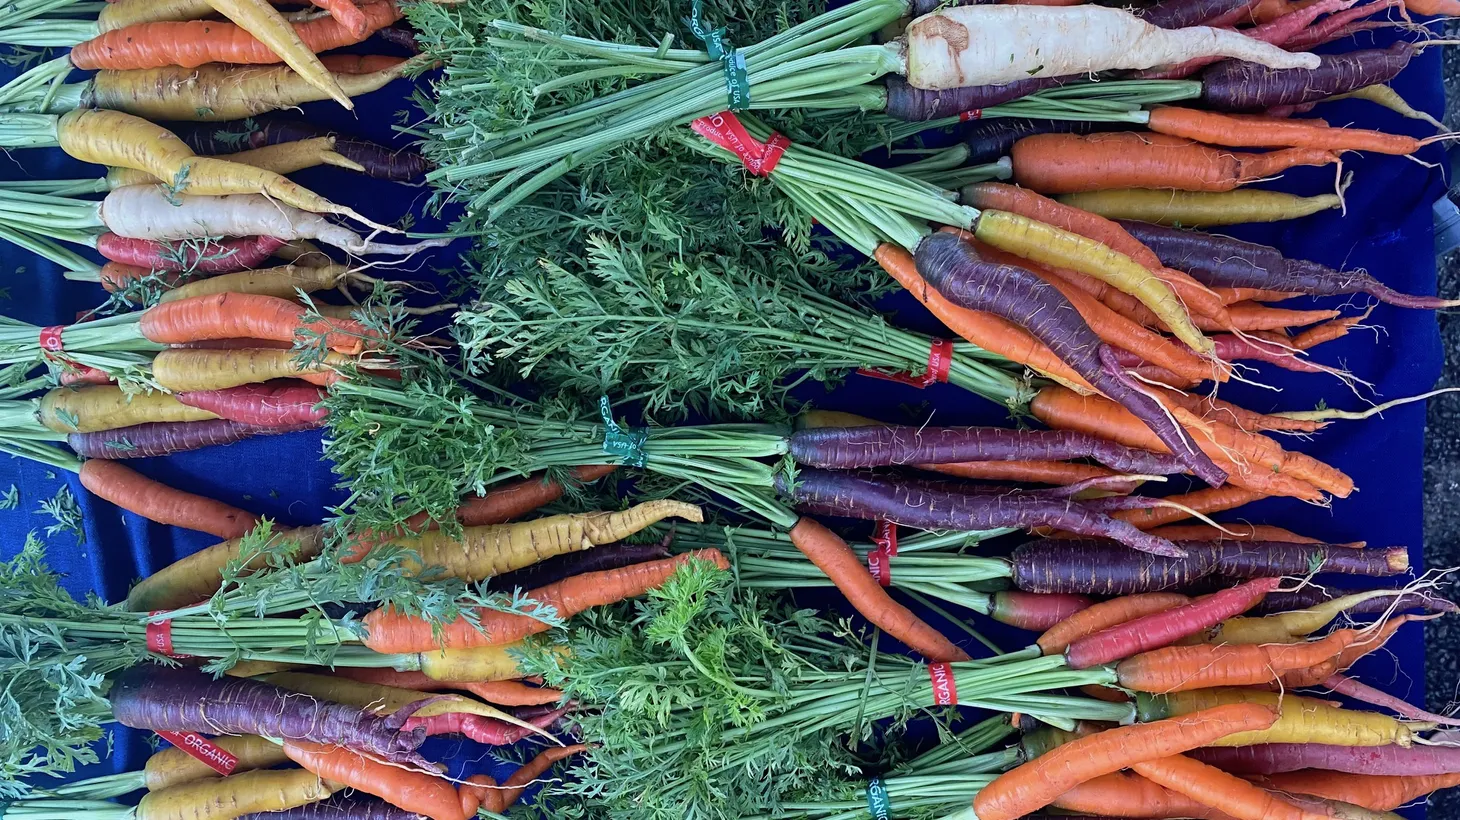 "Their protection is our benefit," says Karen Beverlin, who explains why carrots are sweeter during cooler months.